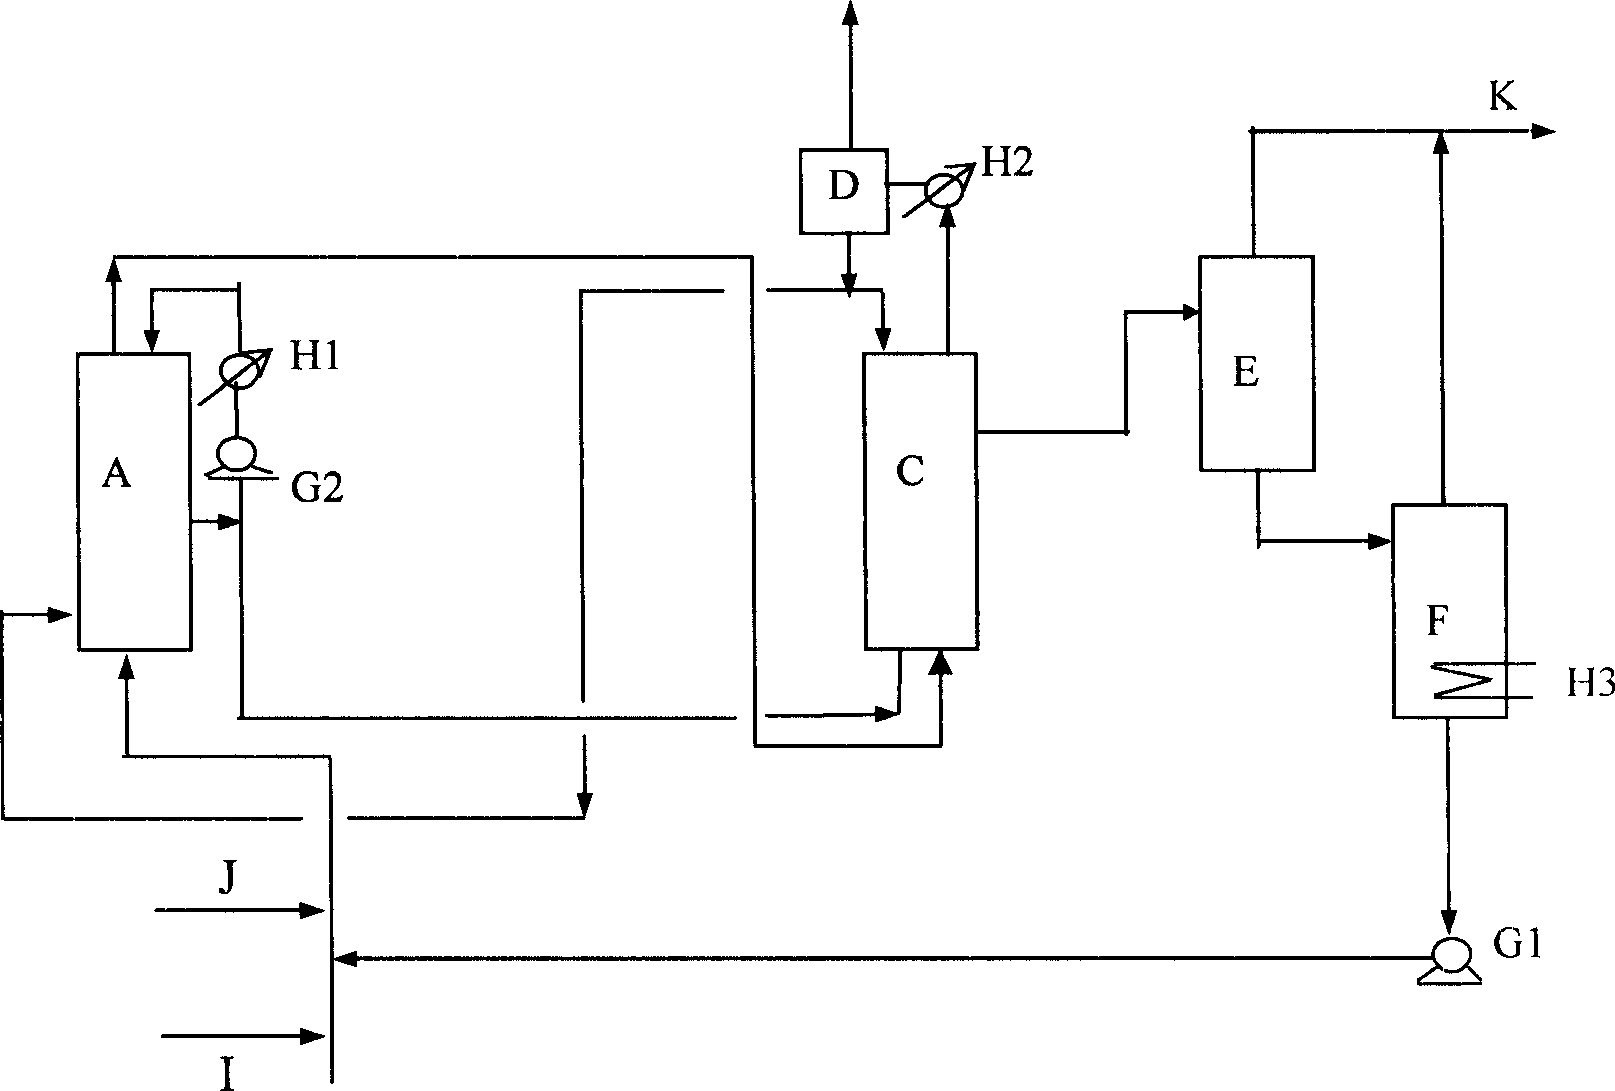 Low pressure methanol carboxylating process to synthesize acetic acid